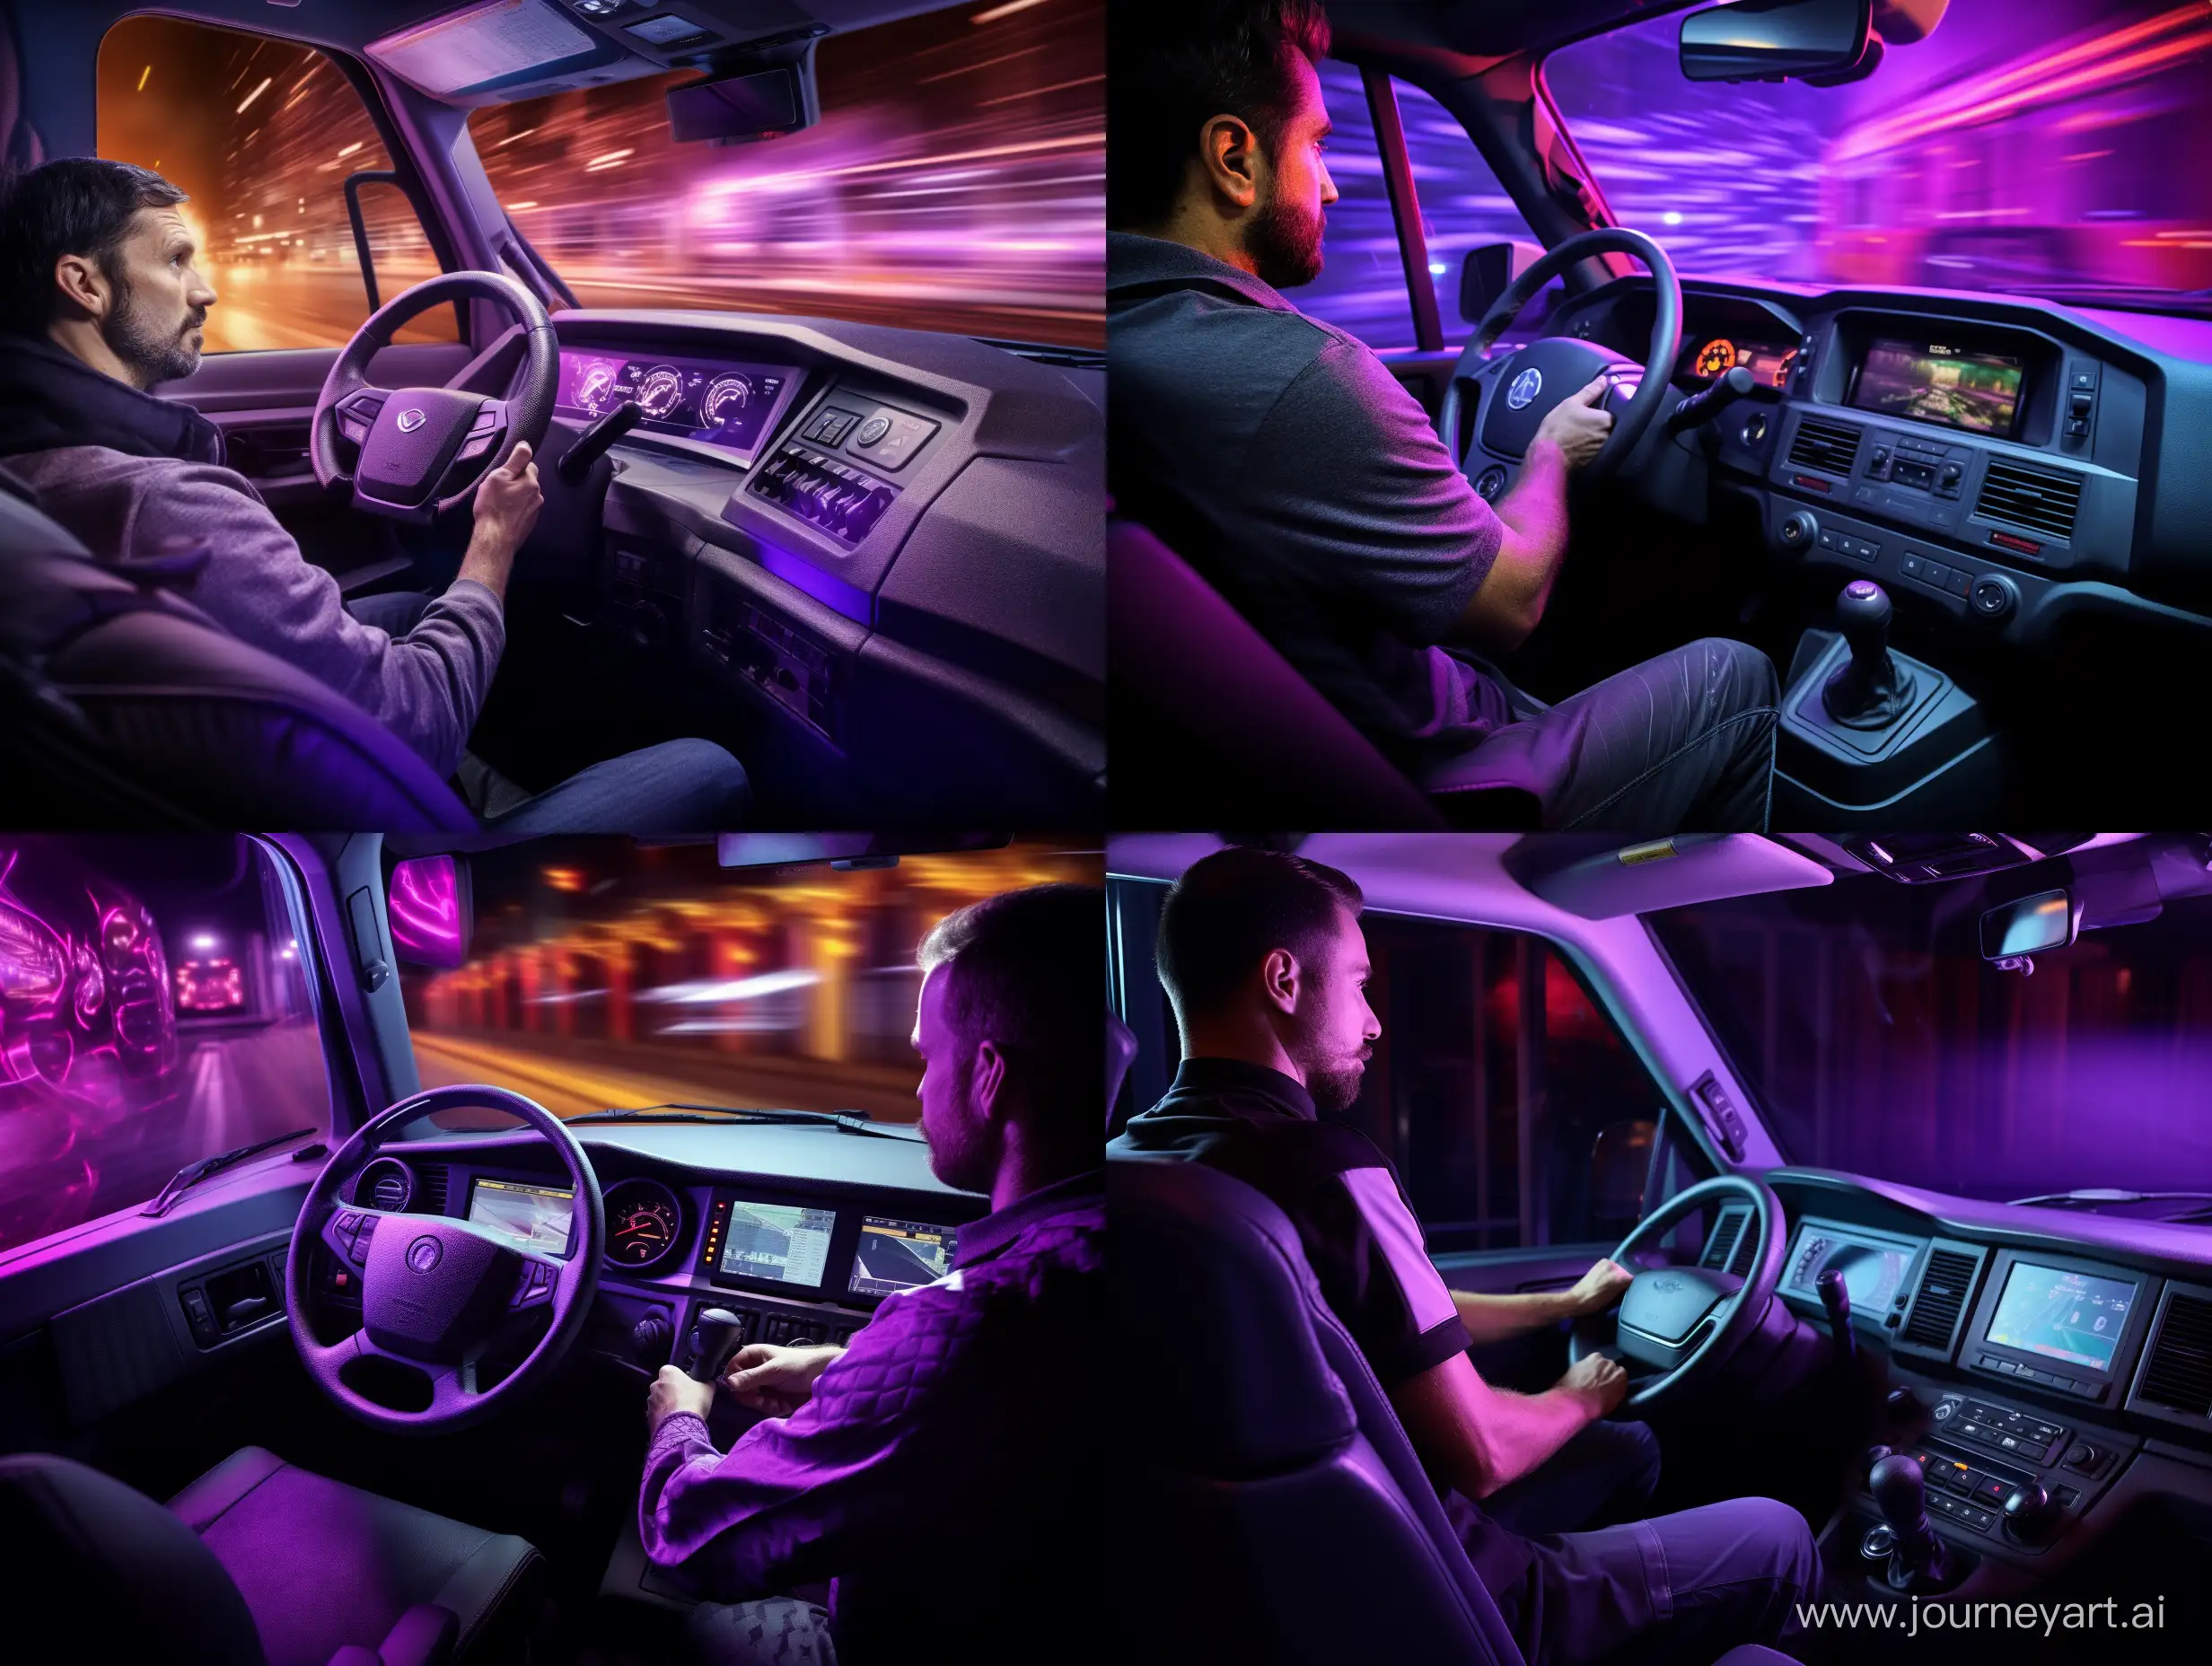 35YearOld-Man-Driving-Iveco-Eurocargo-Truck-with-Realism-and-Purple-Lighting